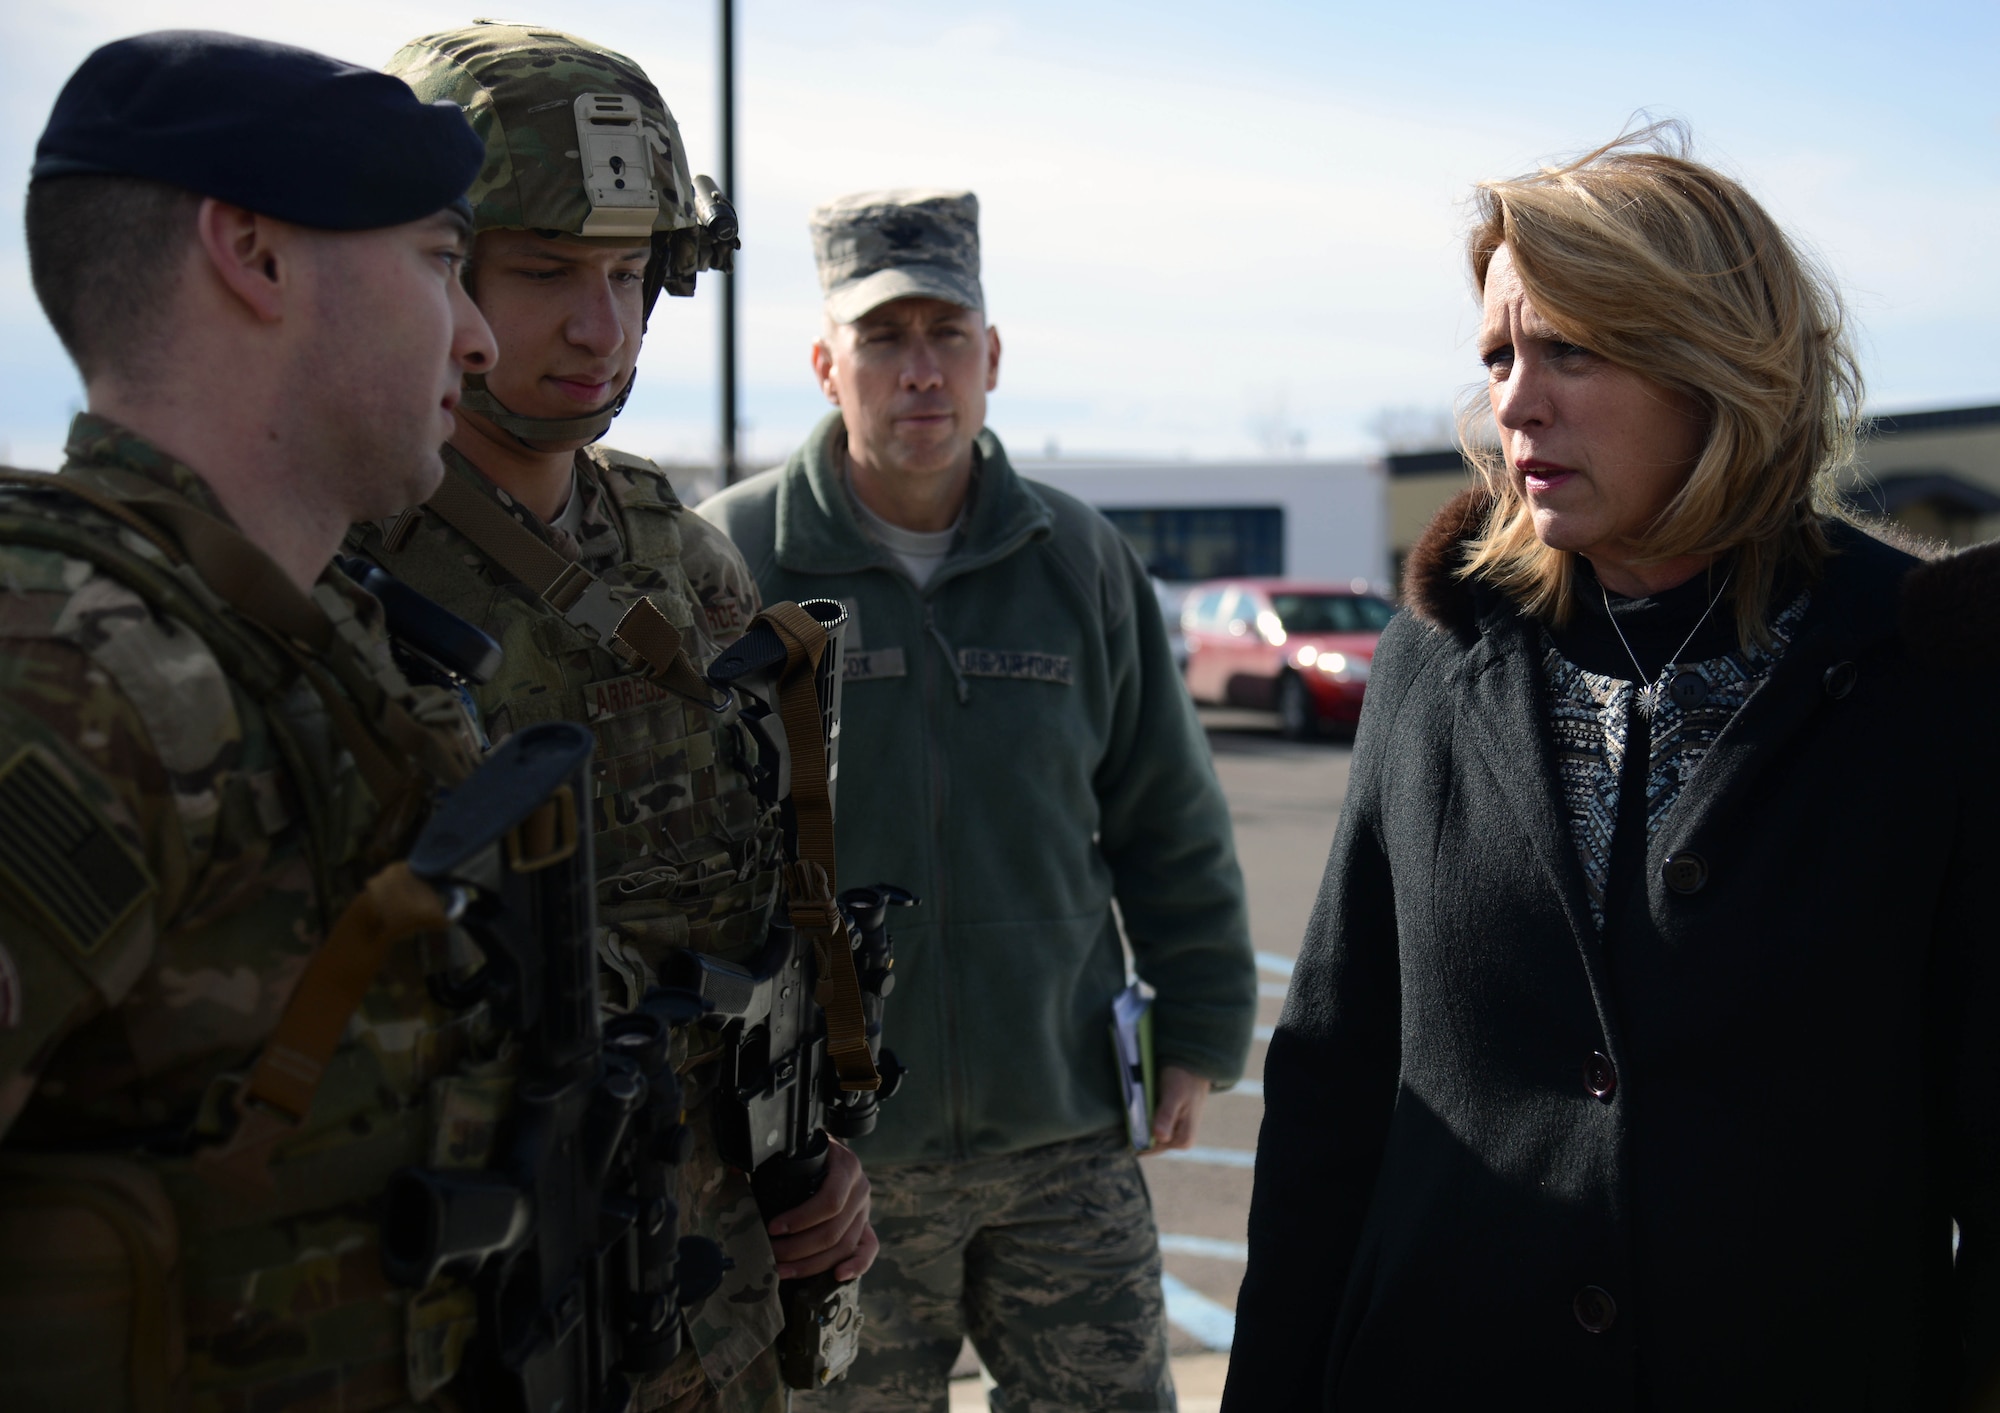 Secretary of the Air Force Deborah Lee James, right, speaks with Airmen Feb. 19, 2015, at Malmstrom Air Force Base, Mont. James visited Malmstrom to discuss its mission and to connect with the Airmen stationed there. (U.S. Air Force photo/Airman 1st Class Dillon Johnston)